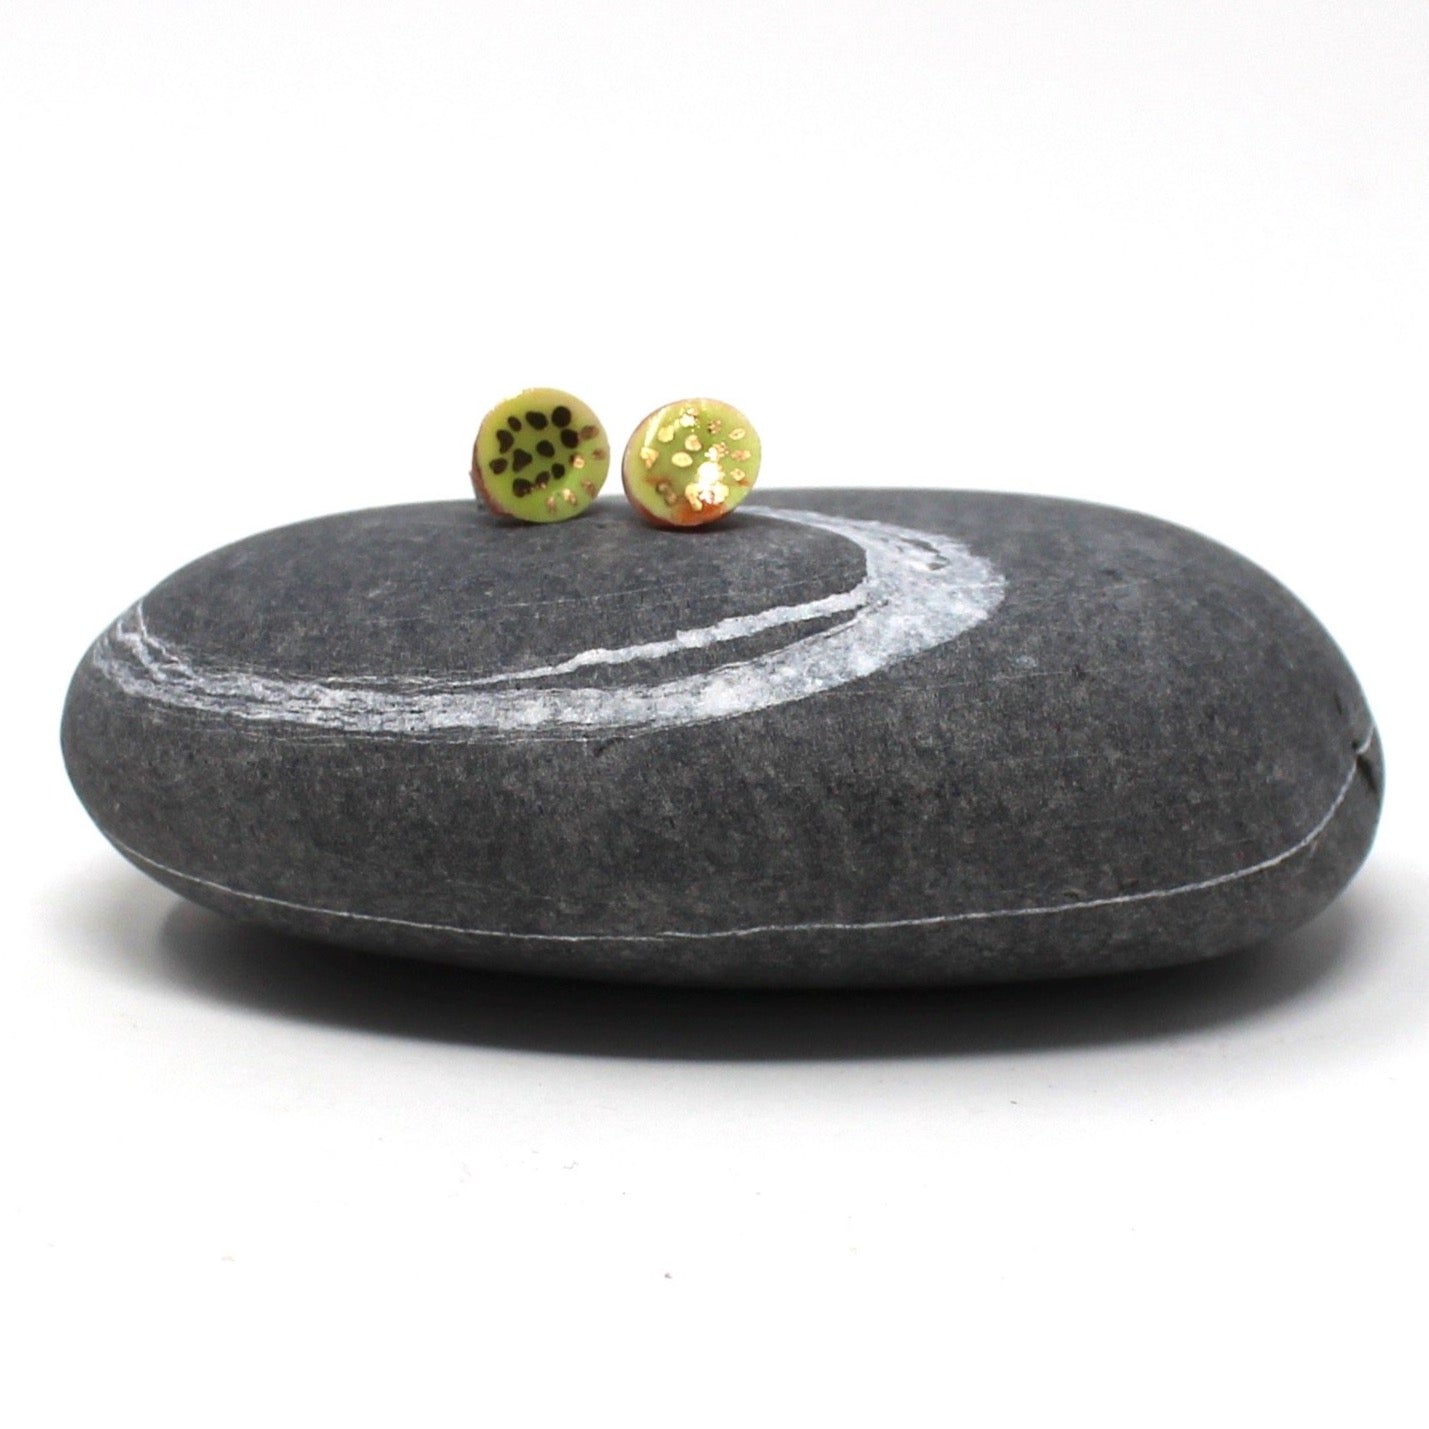 Green and Gold Porcelain Stud Earrings